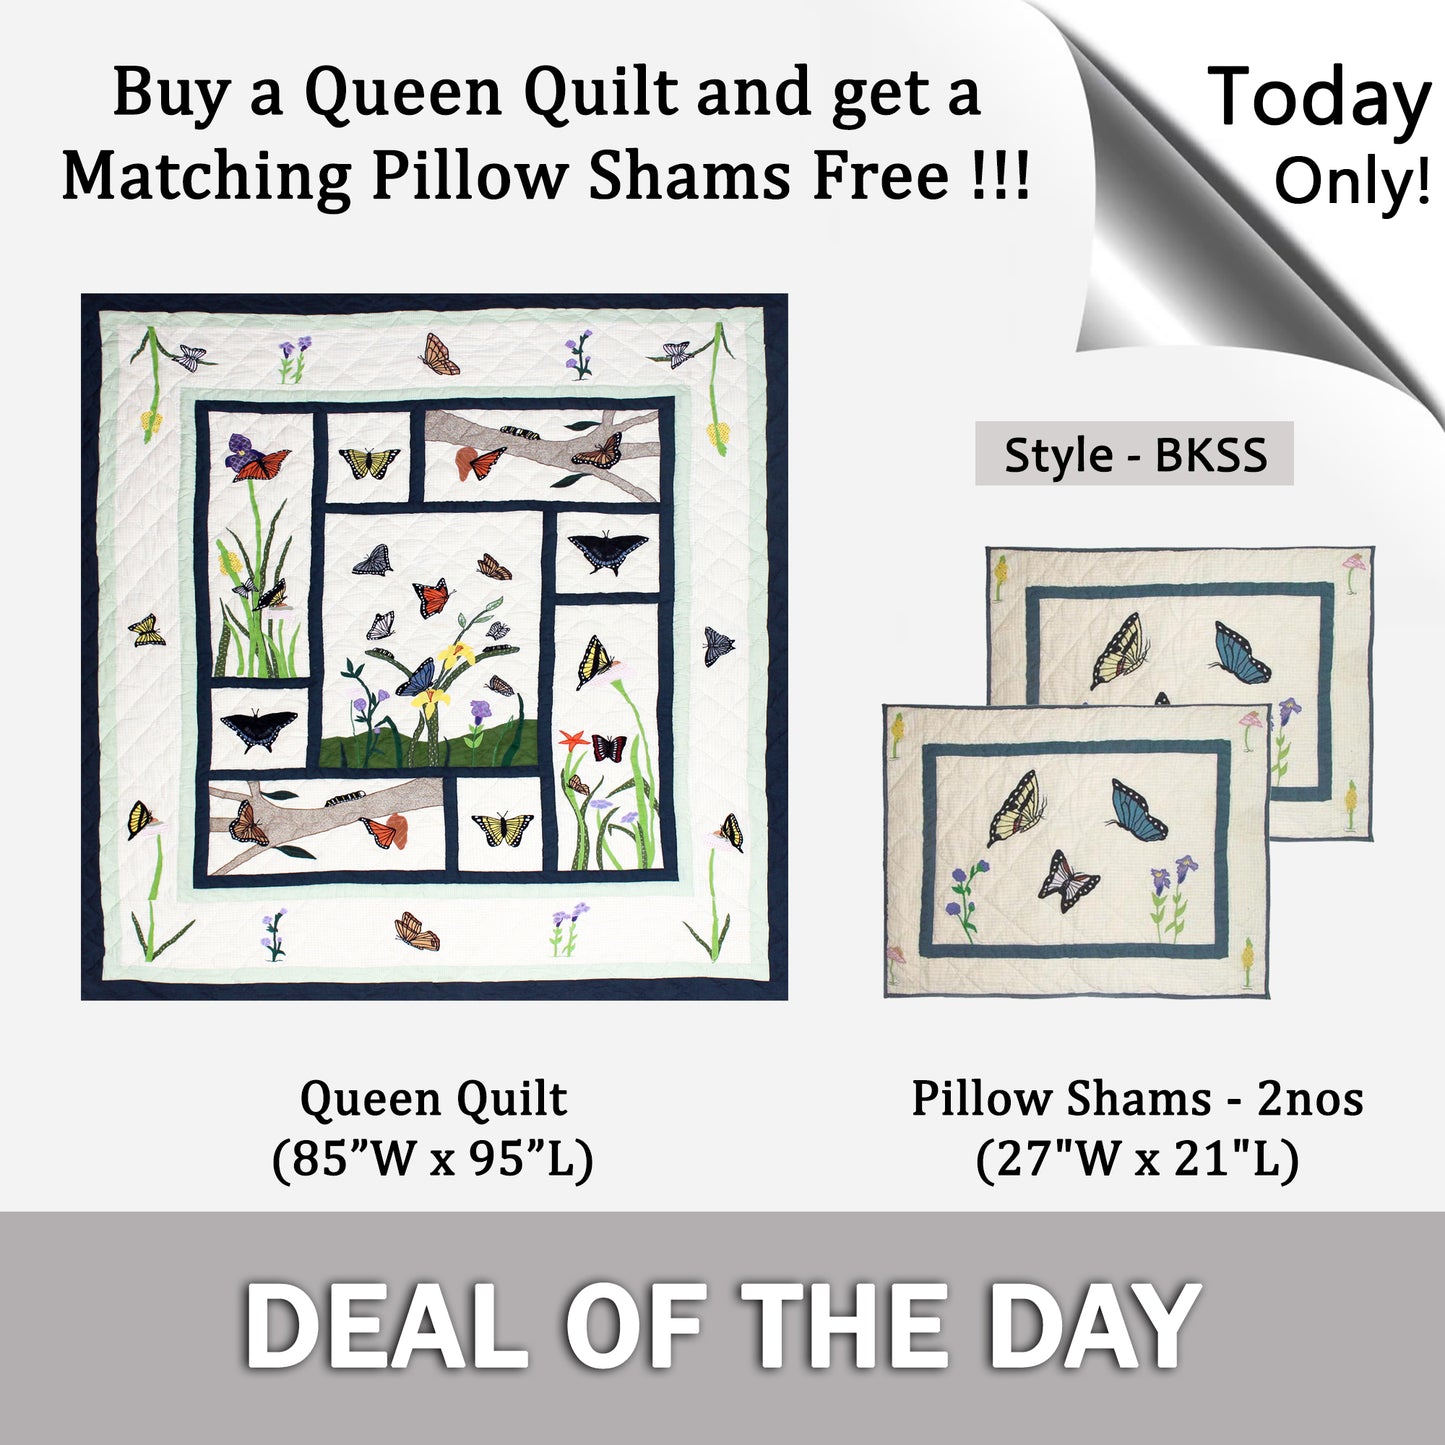 Buy a Queen Quilt (85”W x 95”L) and get a  Matching Pillow Shams (27"W x 21"L) Free !!!